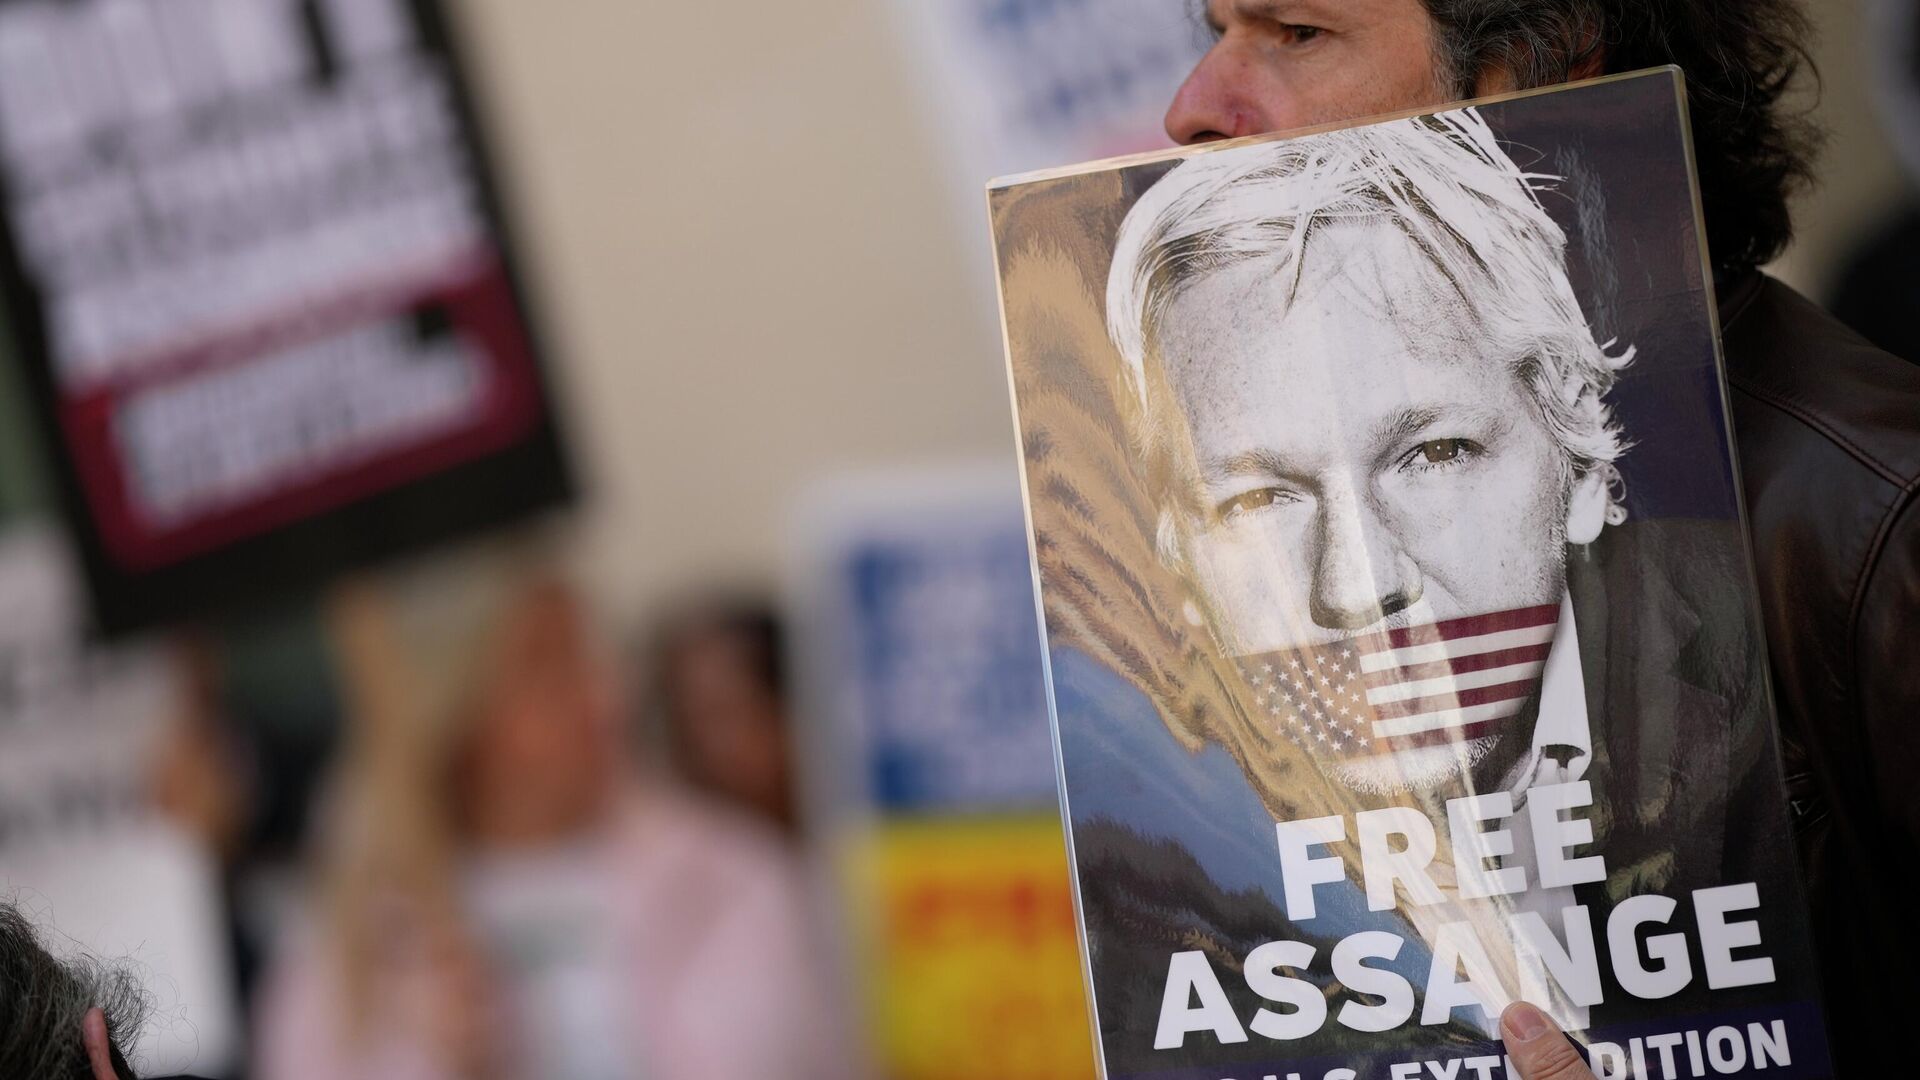 Wikileaks founder Julian Assange supporters hold placards as they gather outside Westminster Magistrates court In London, Wednesday, April 20, 2022. - Sputnik International, 1920, 21.04.2022